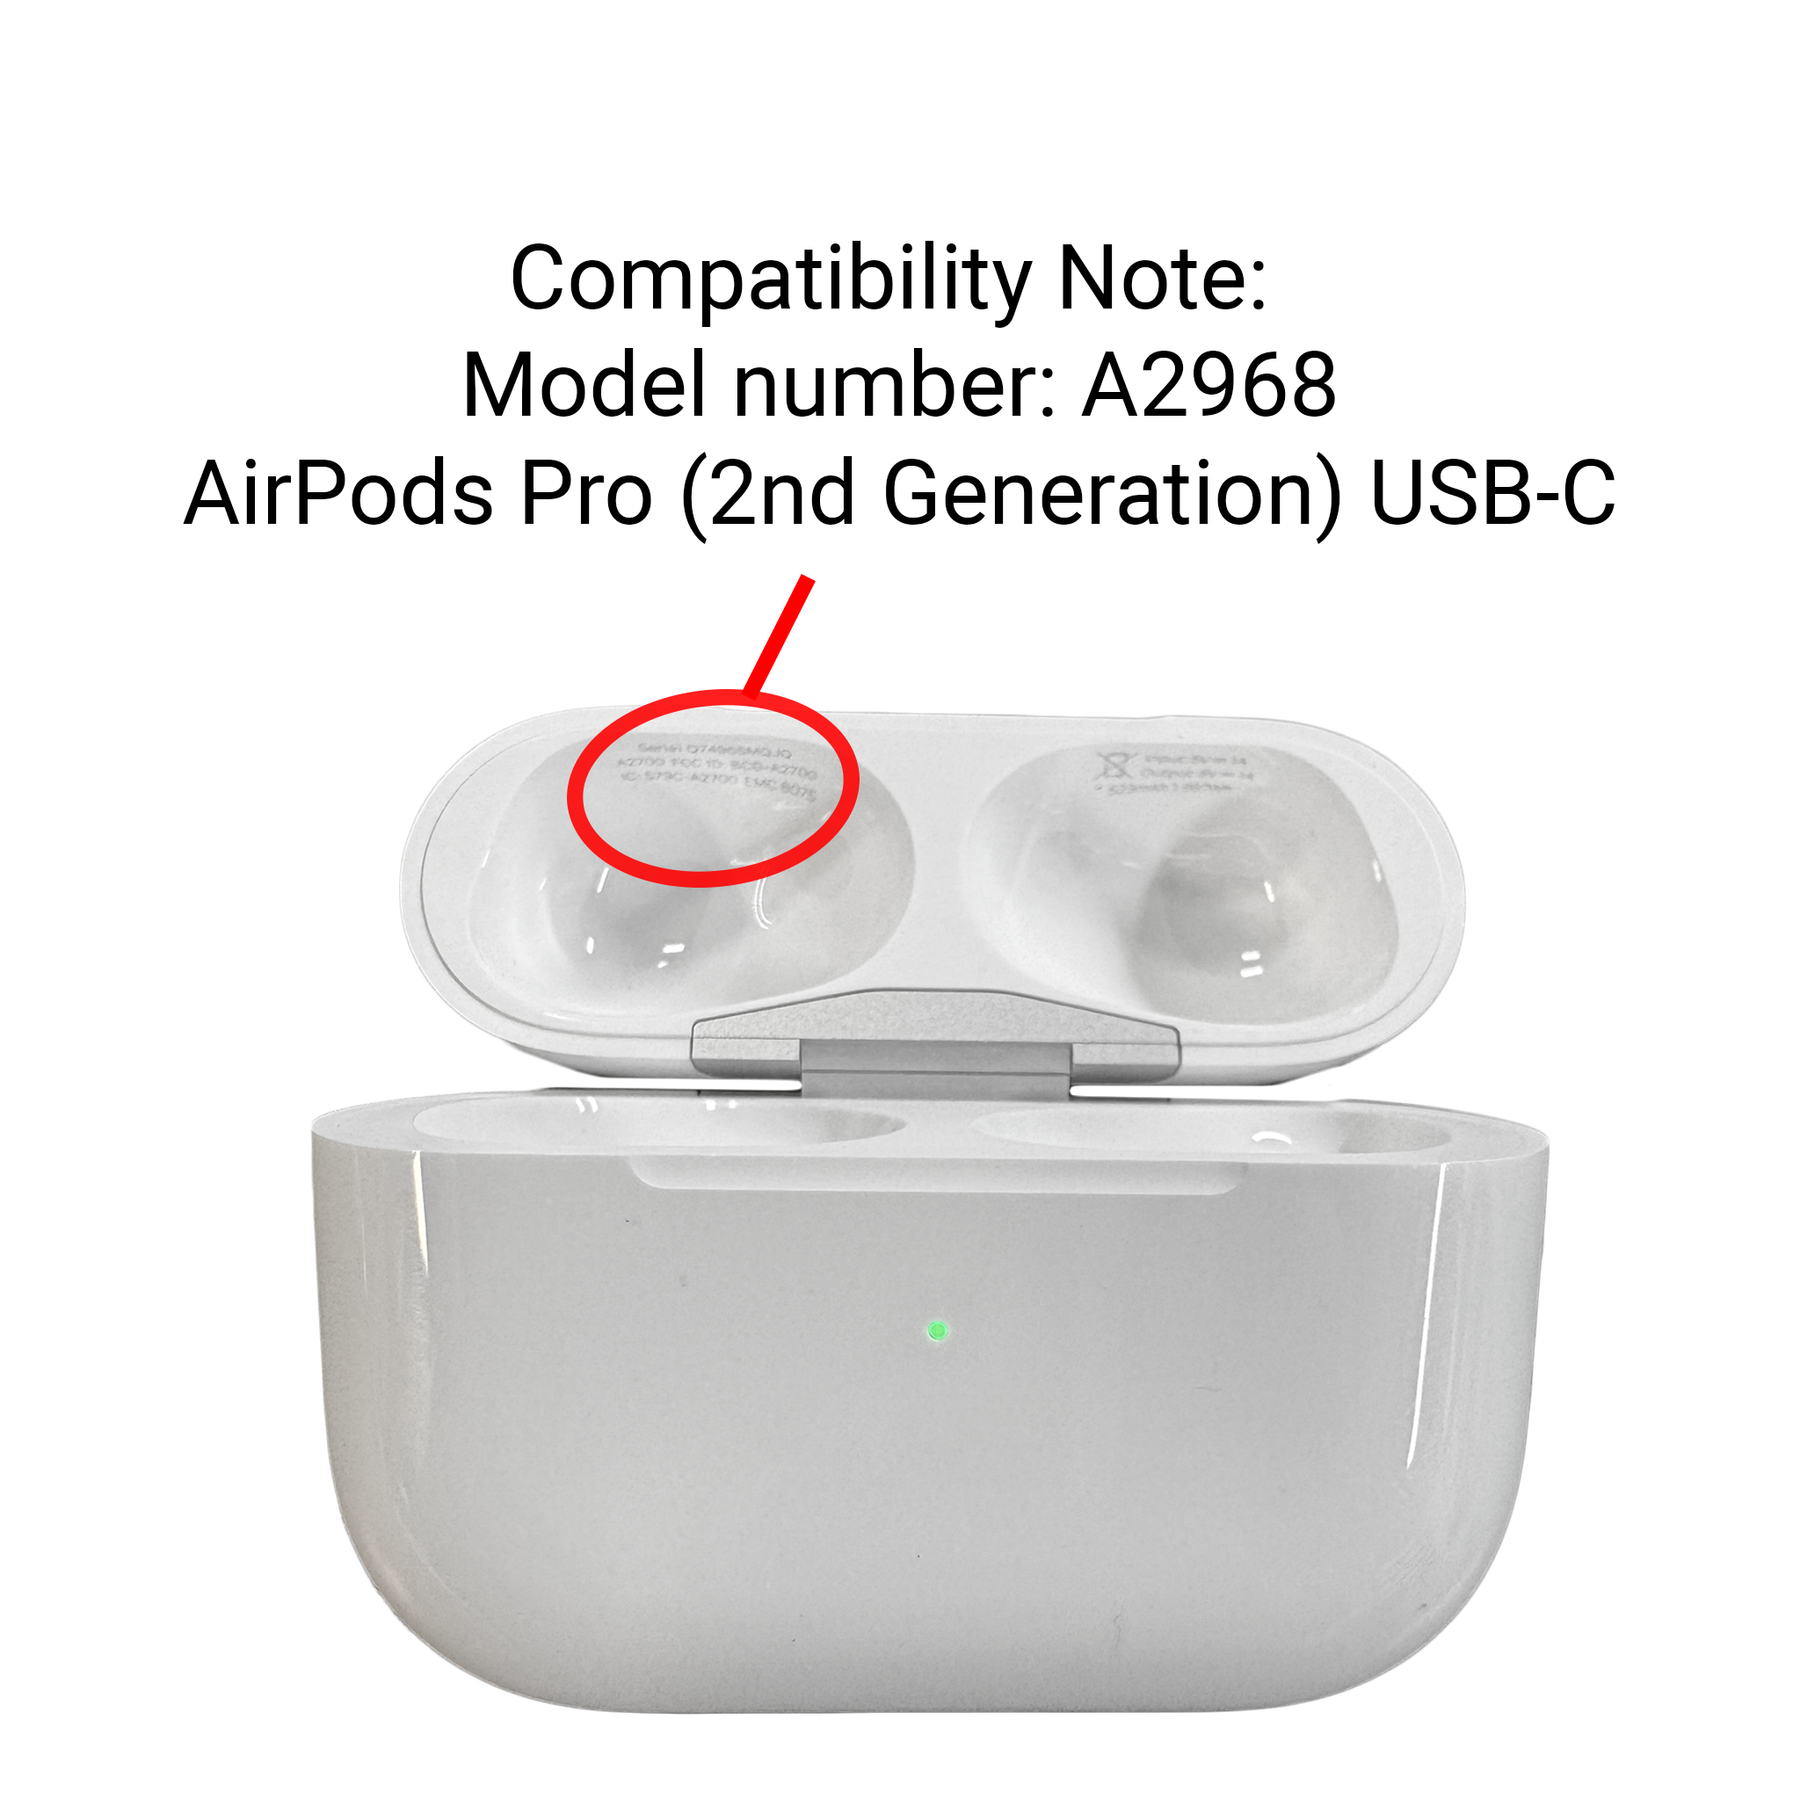 MagSafe Charging Case (USB‑C) for AirPods Pro (2nd generation)